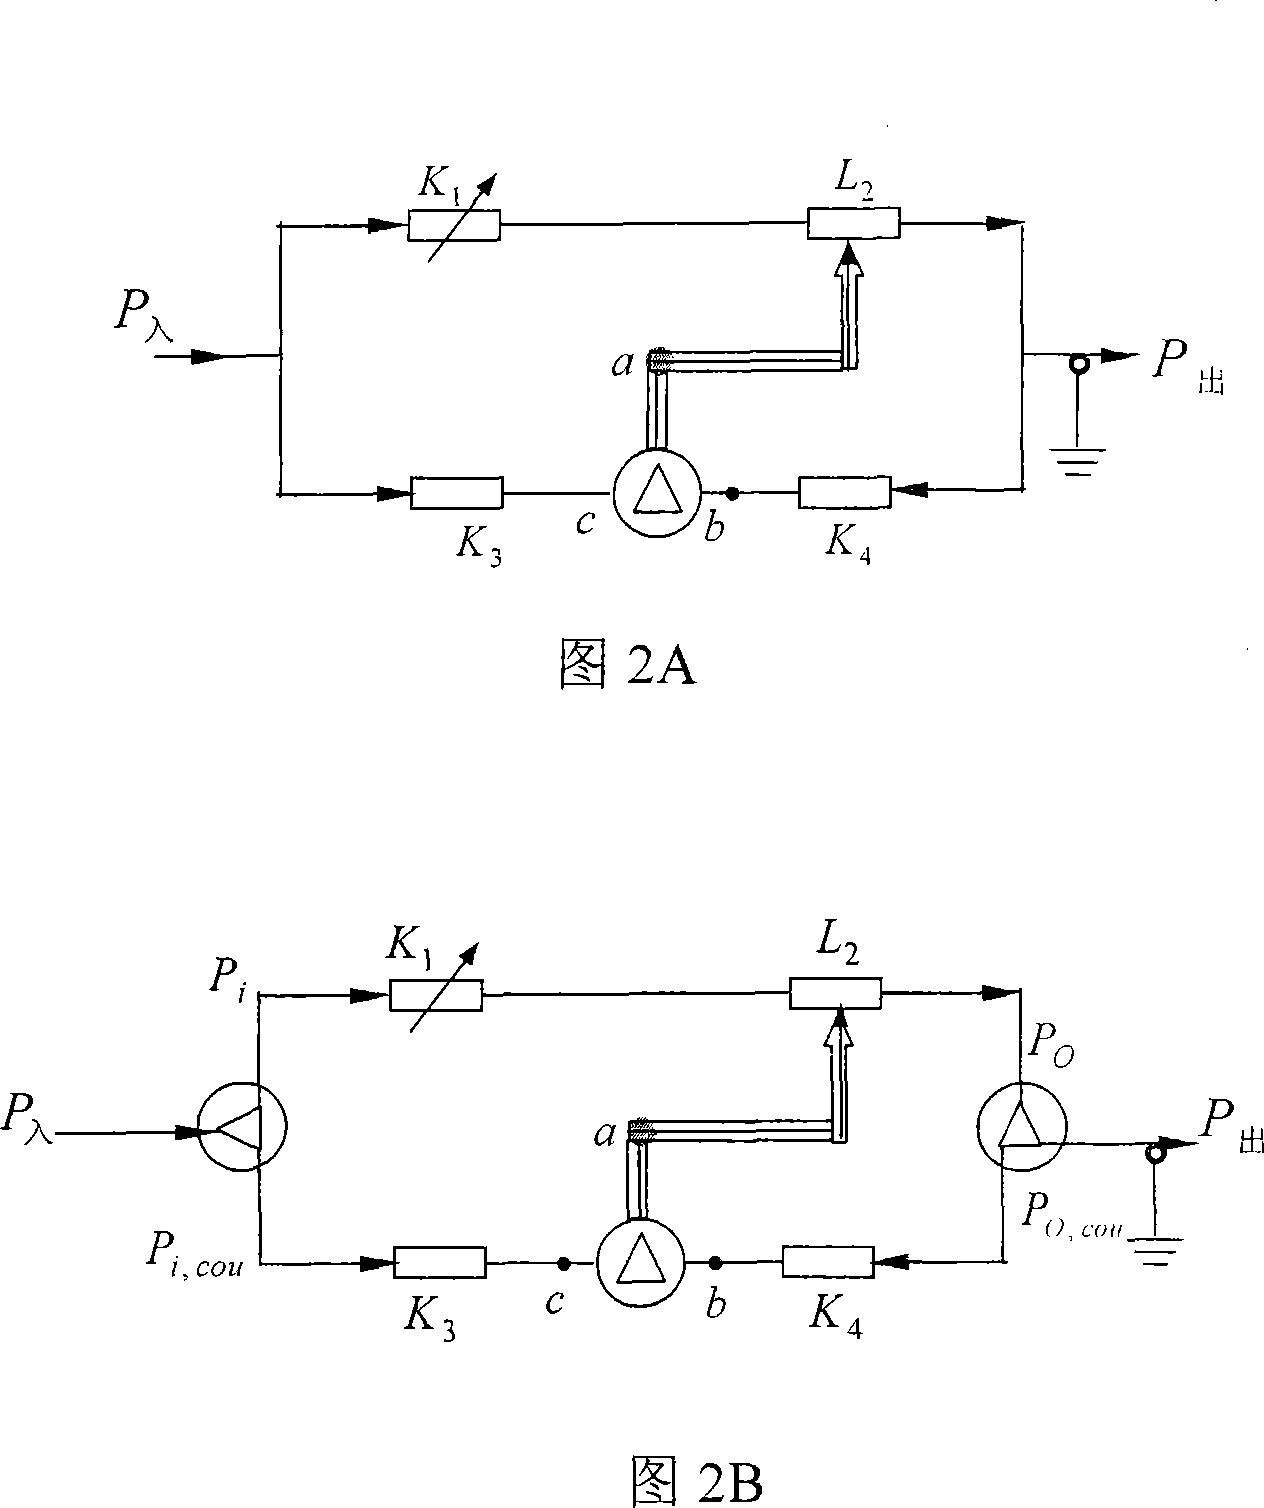 Automatic control method for RF amplifier gain based on varying electrical bridge principle